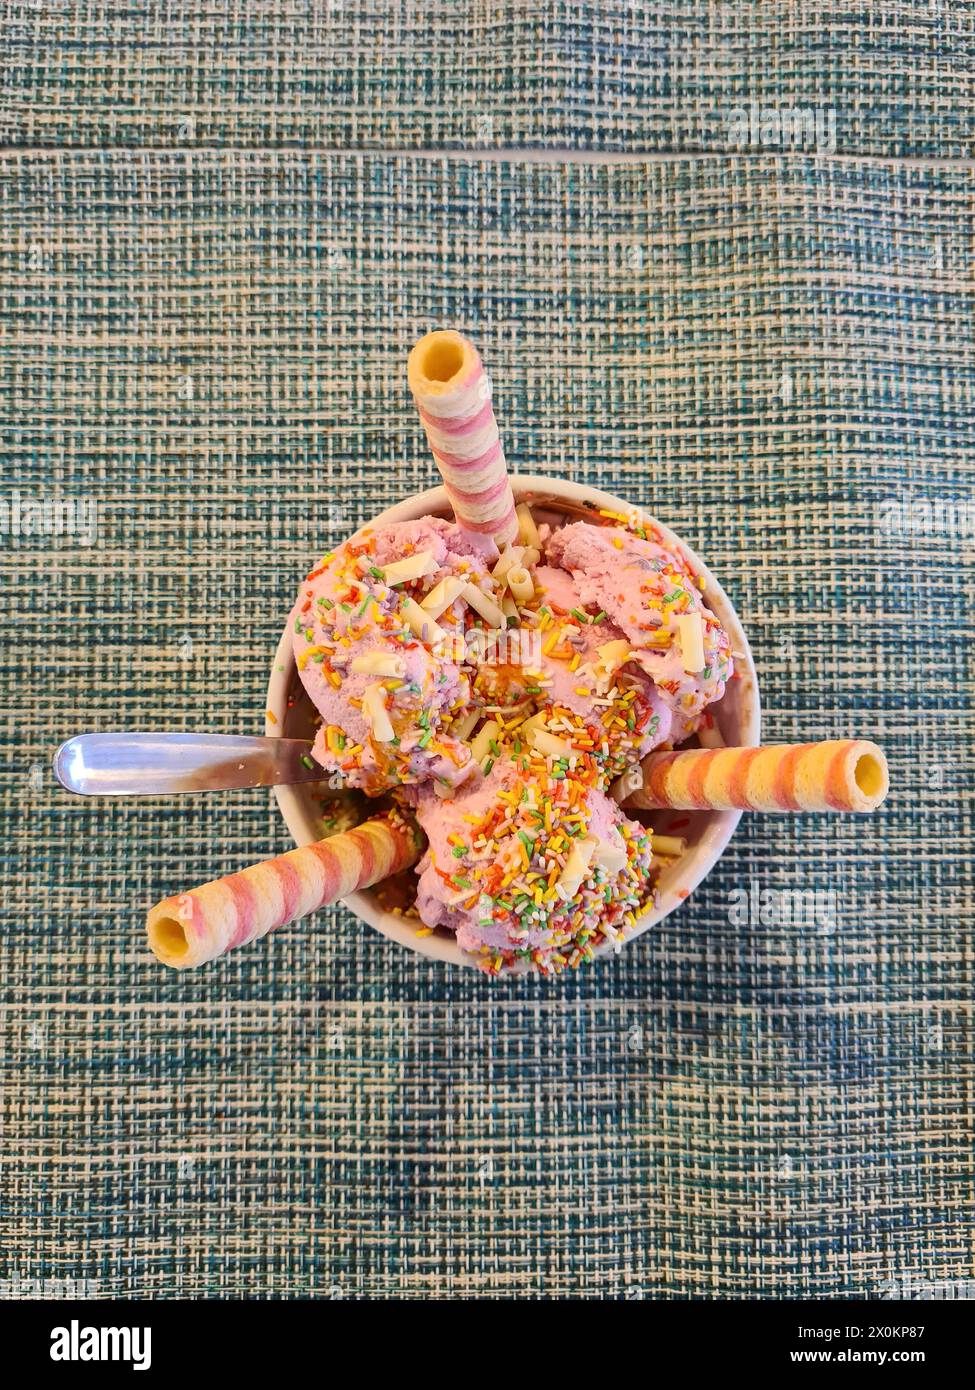 A colorful ice cream sundae with three scoops of strawberry ice cream and colorful sprinkles, garnished with three striped ice cream cones, Mallorca, Spain Stock Photo